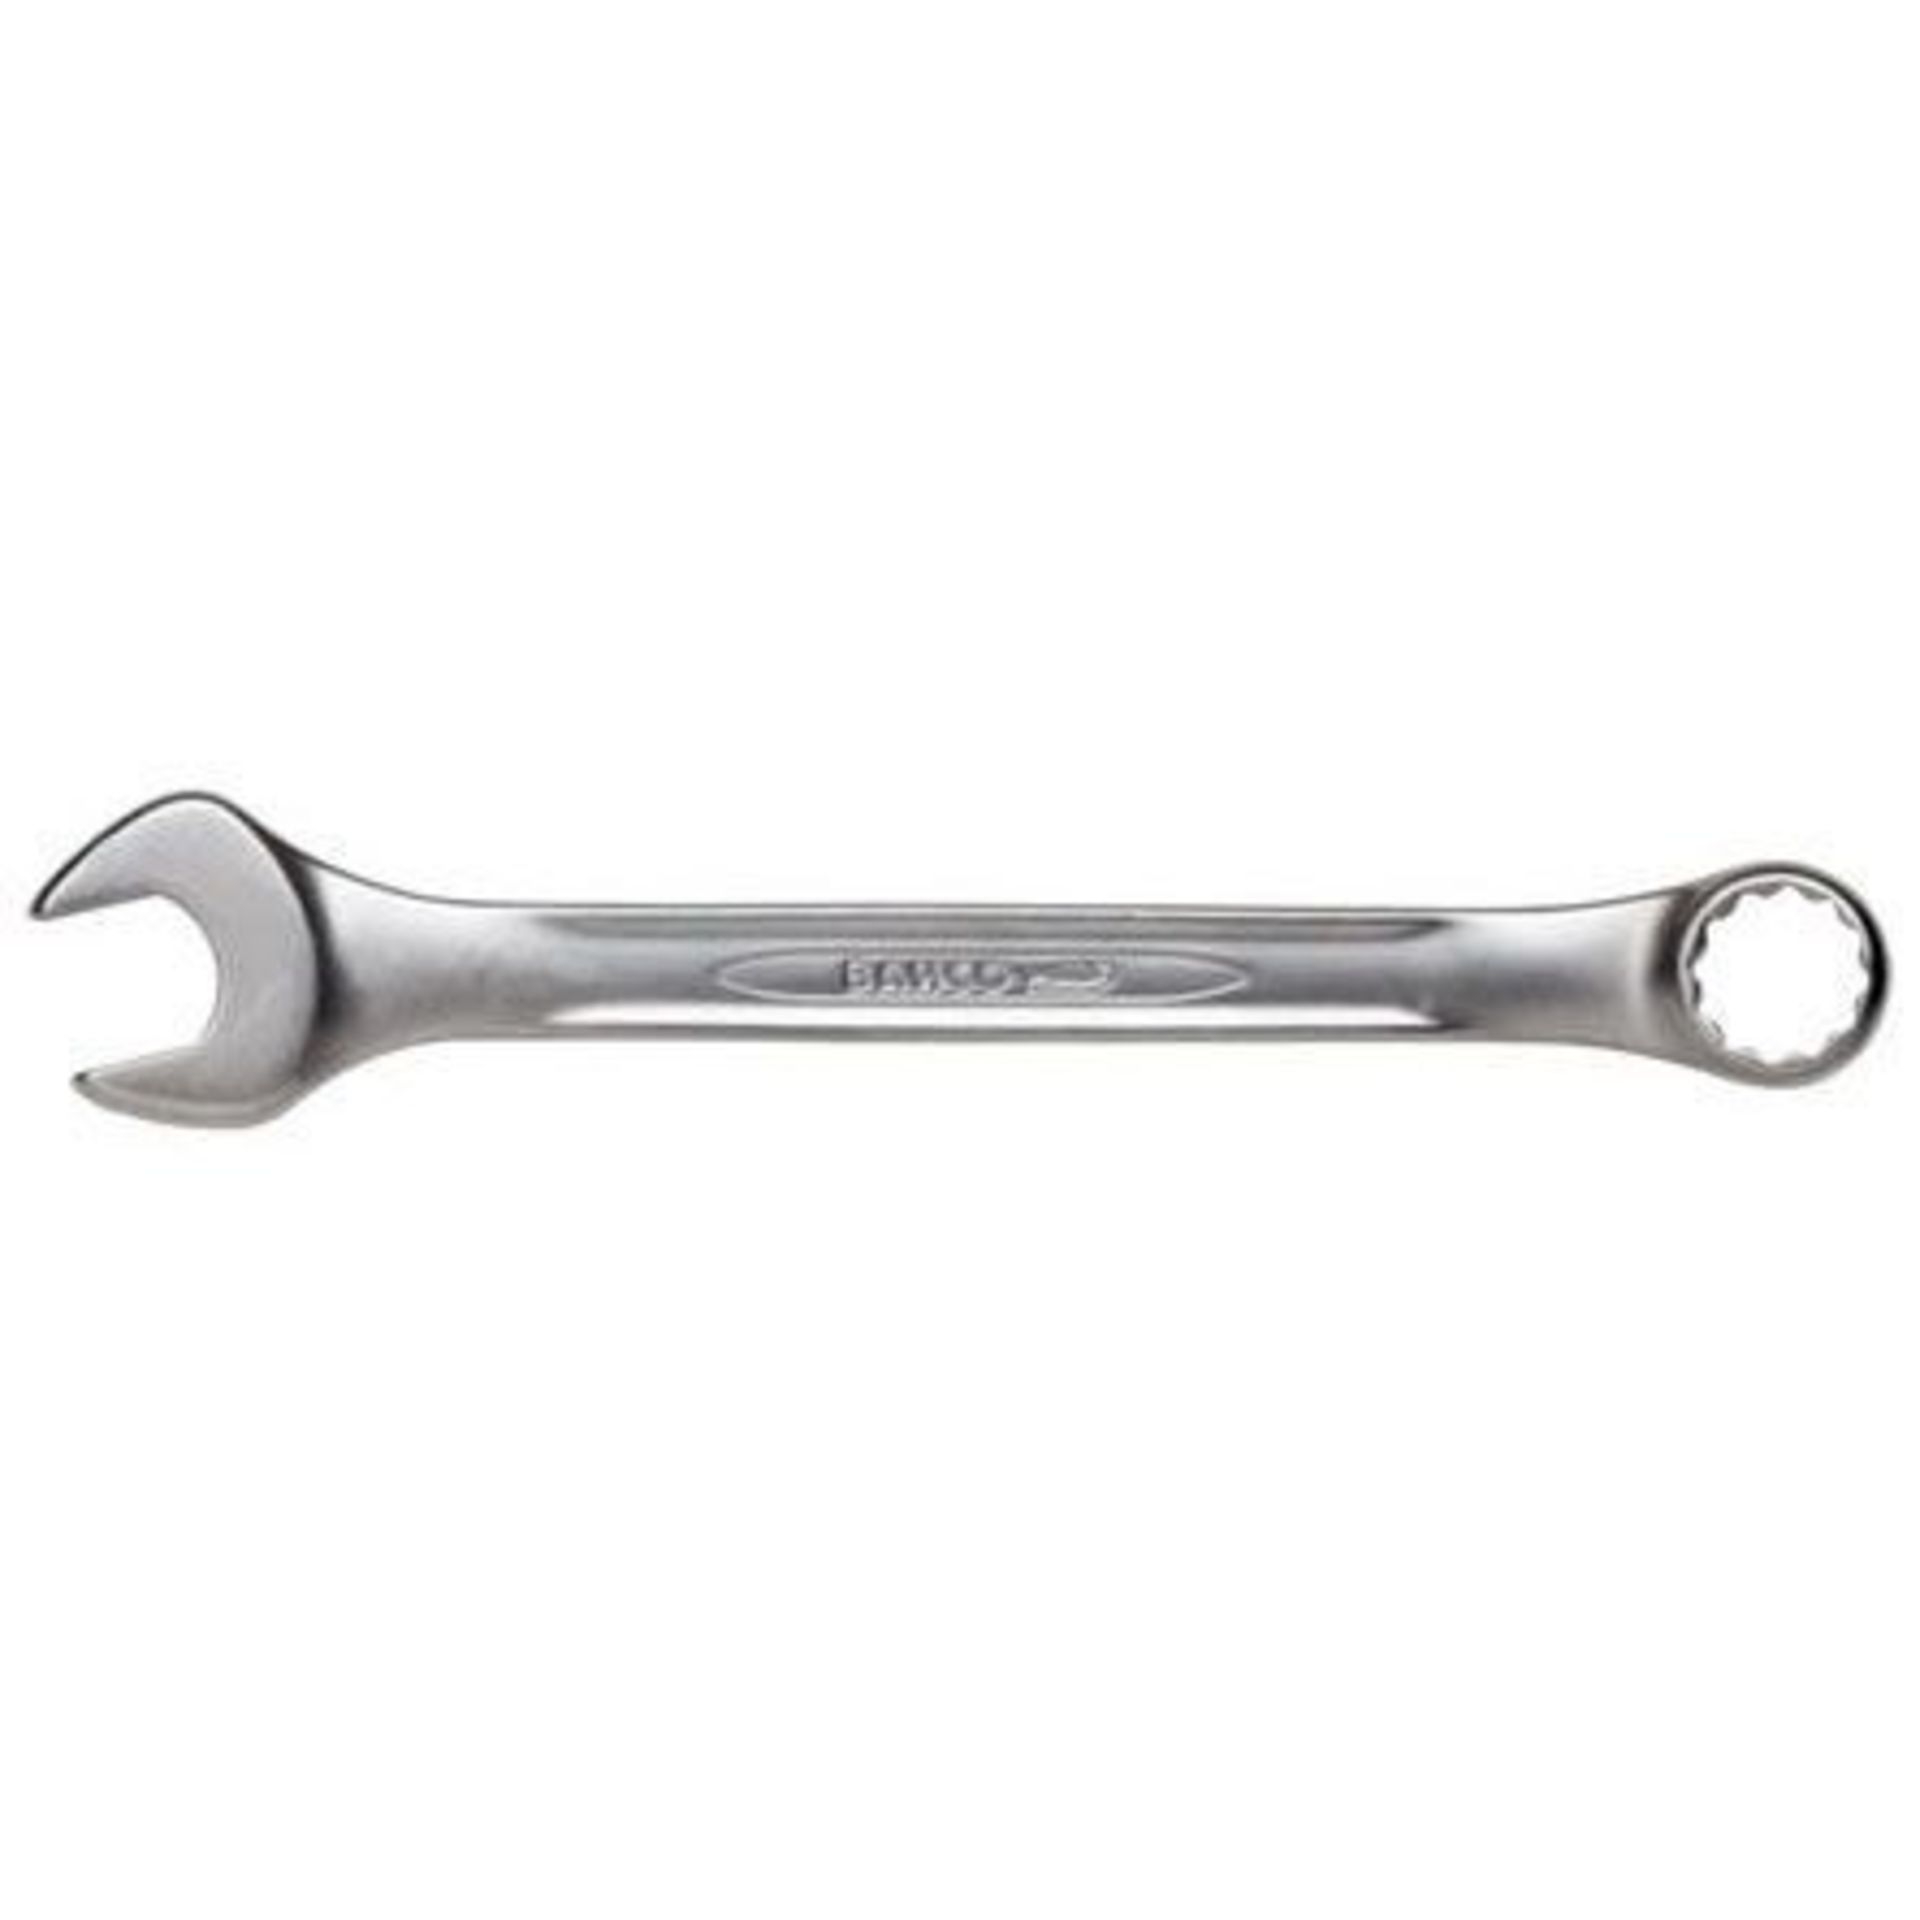 100 x Bahco 1 1/8 in Combination Spanner, Alloy Steel